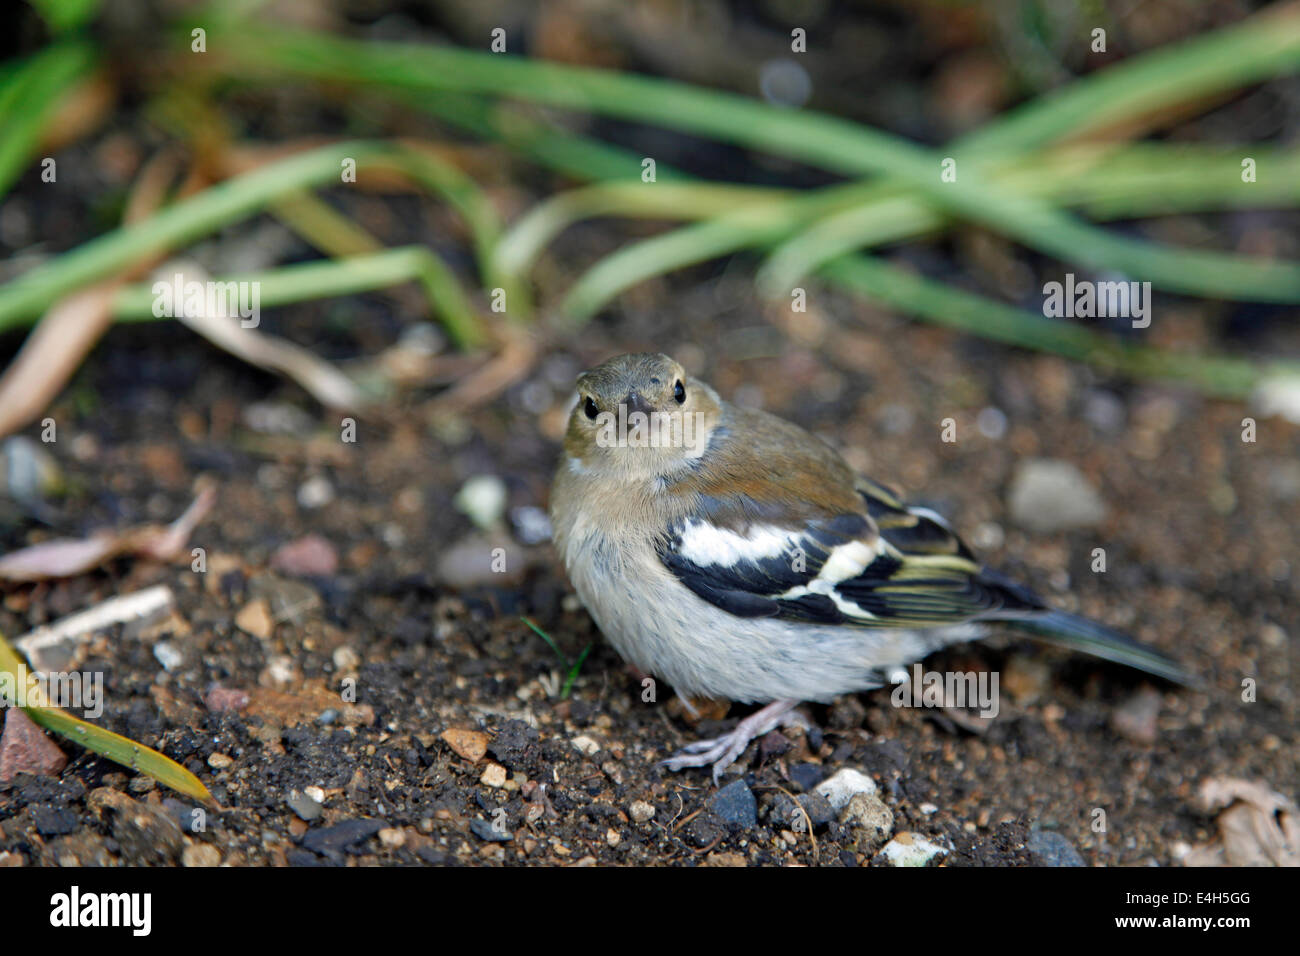 Female Chaffinch at rest in a garden Stock Photo